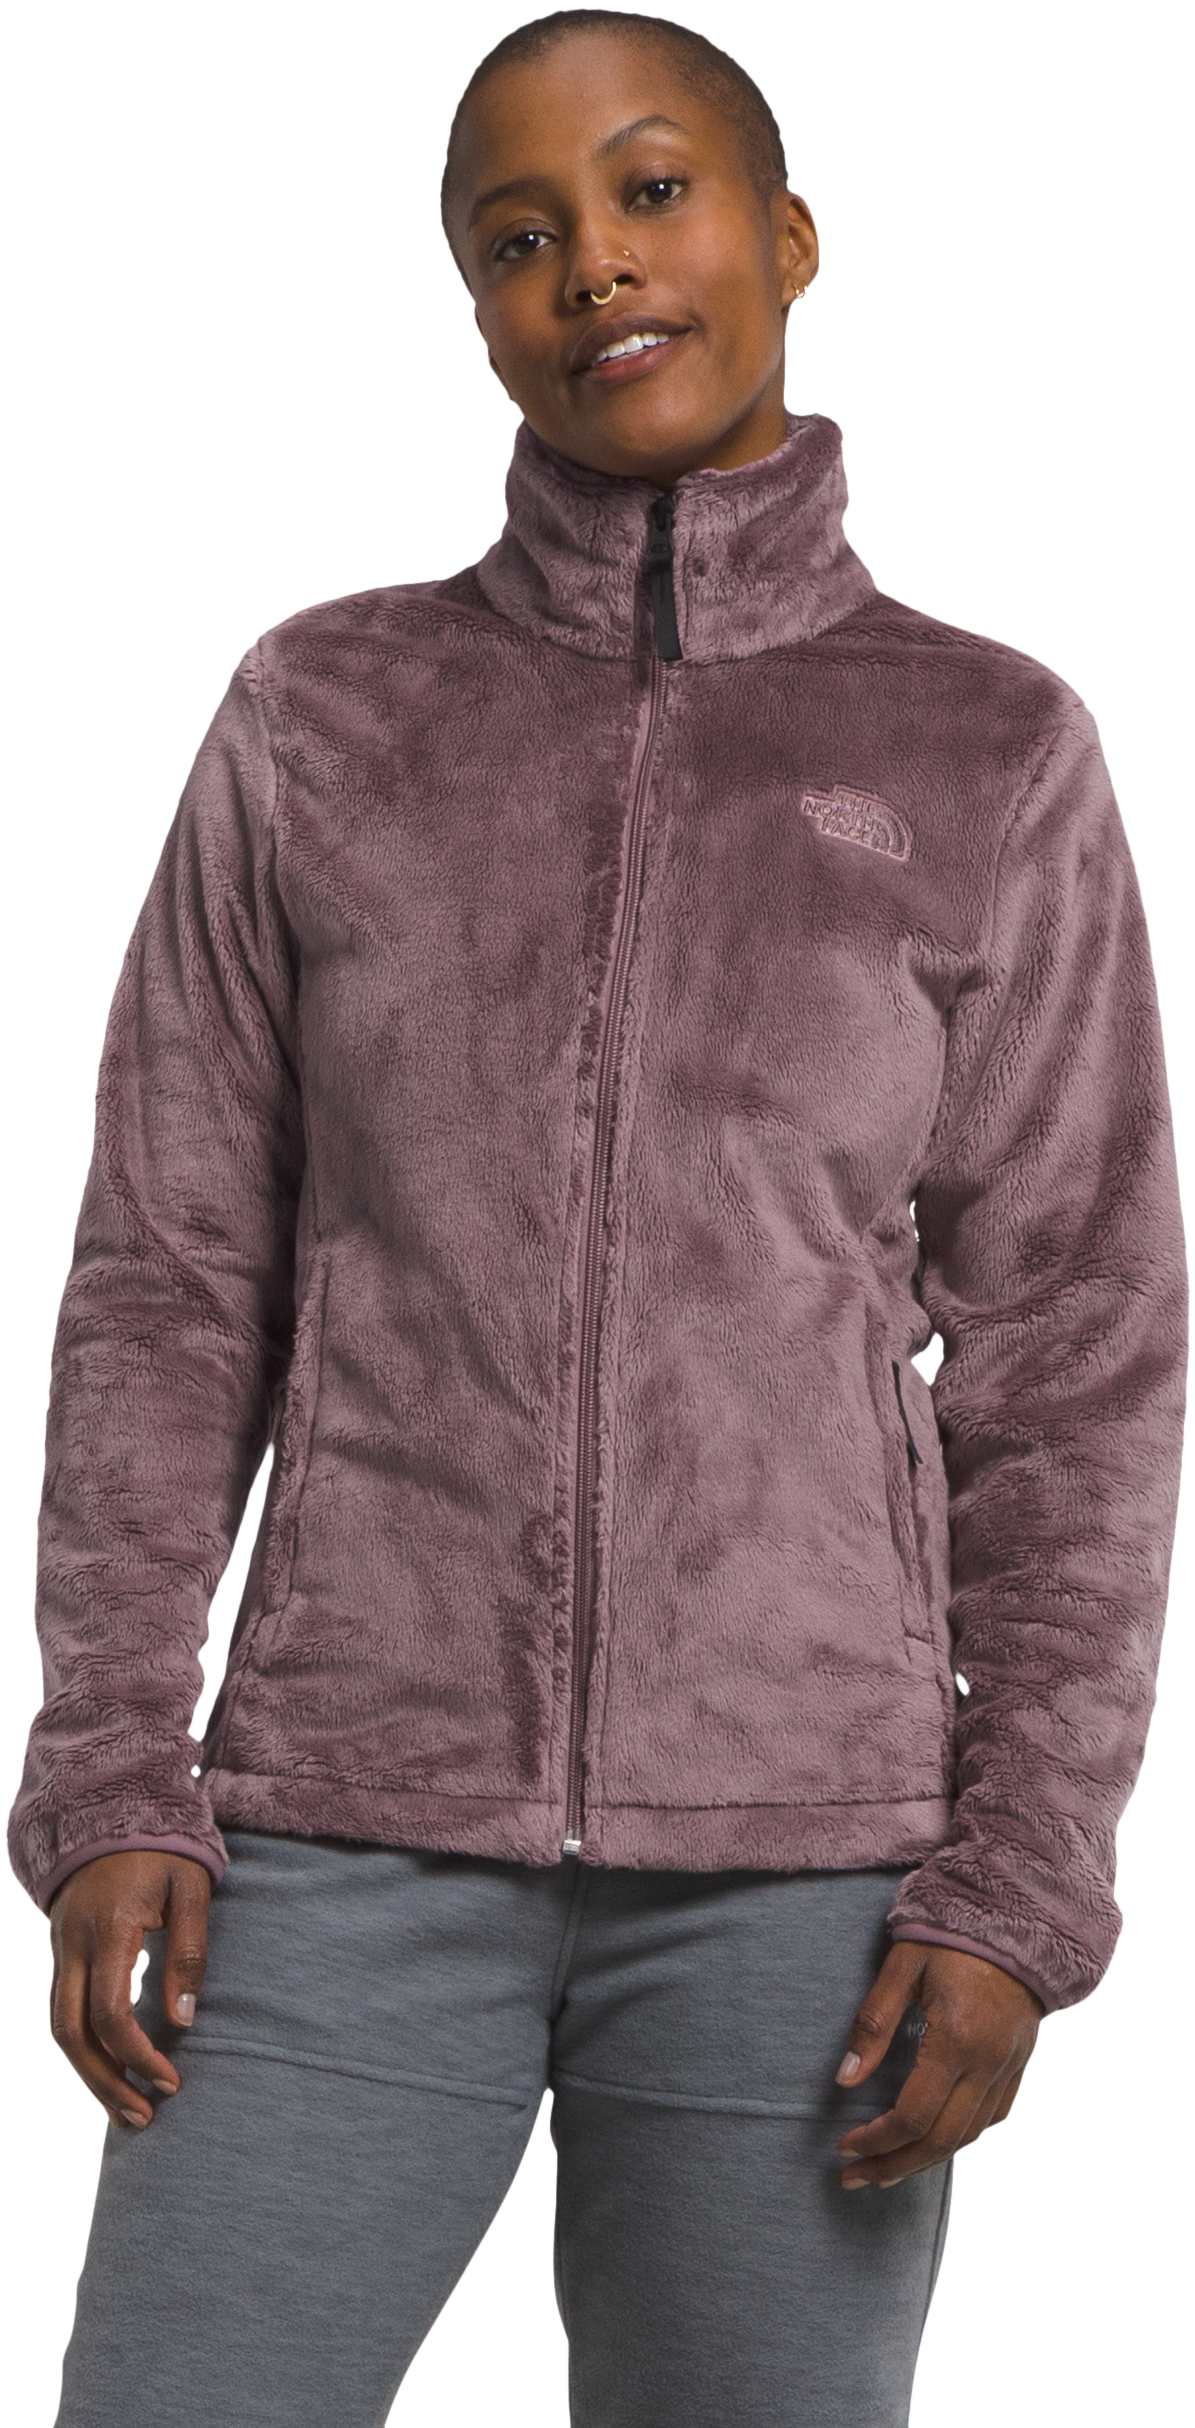 The North Face Osito Jacket for Ladies - Fawn Grey - XL